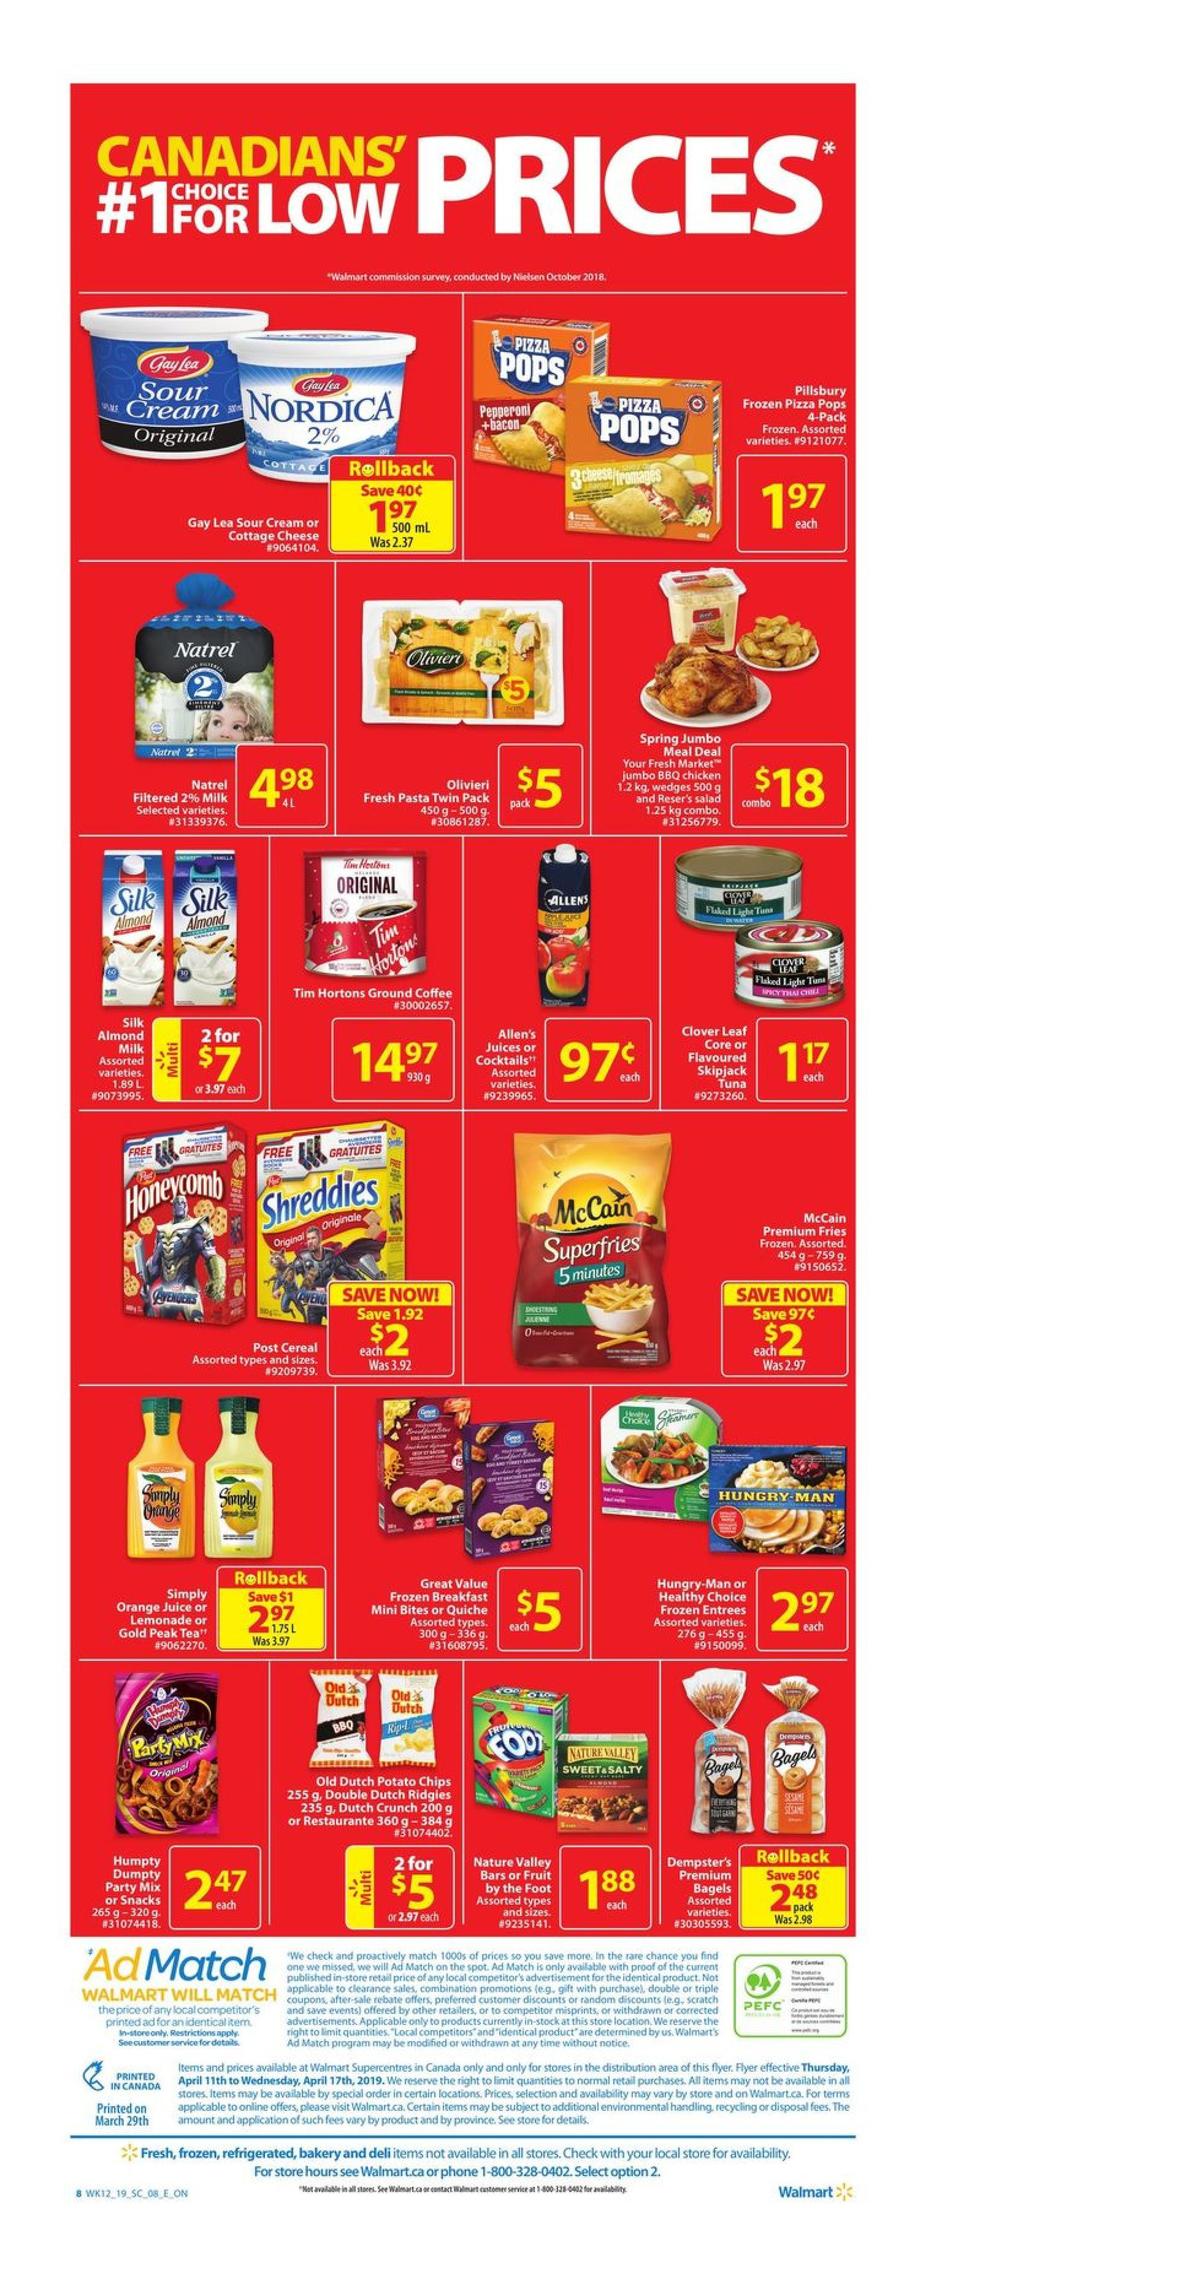 Walmart Flyer from April 11